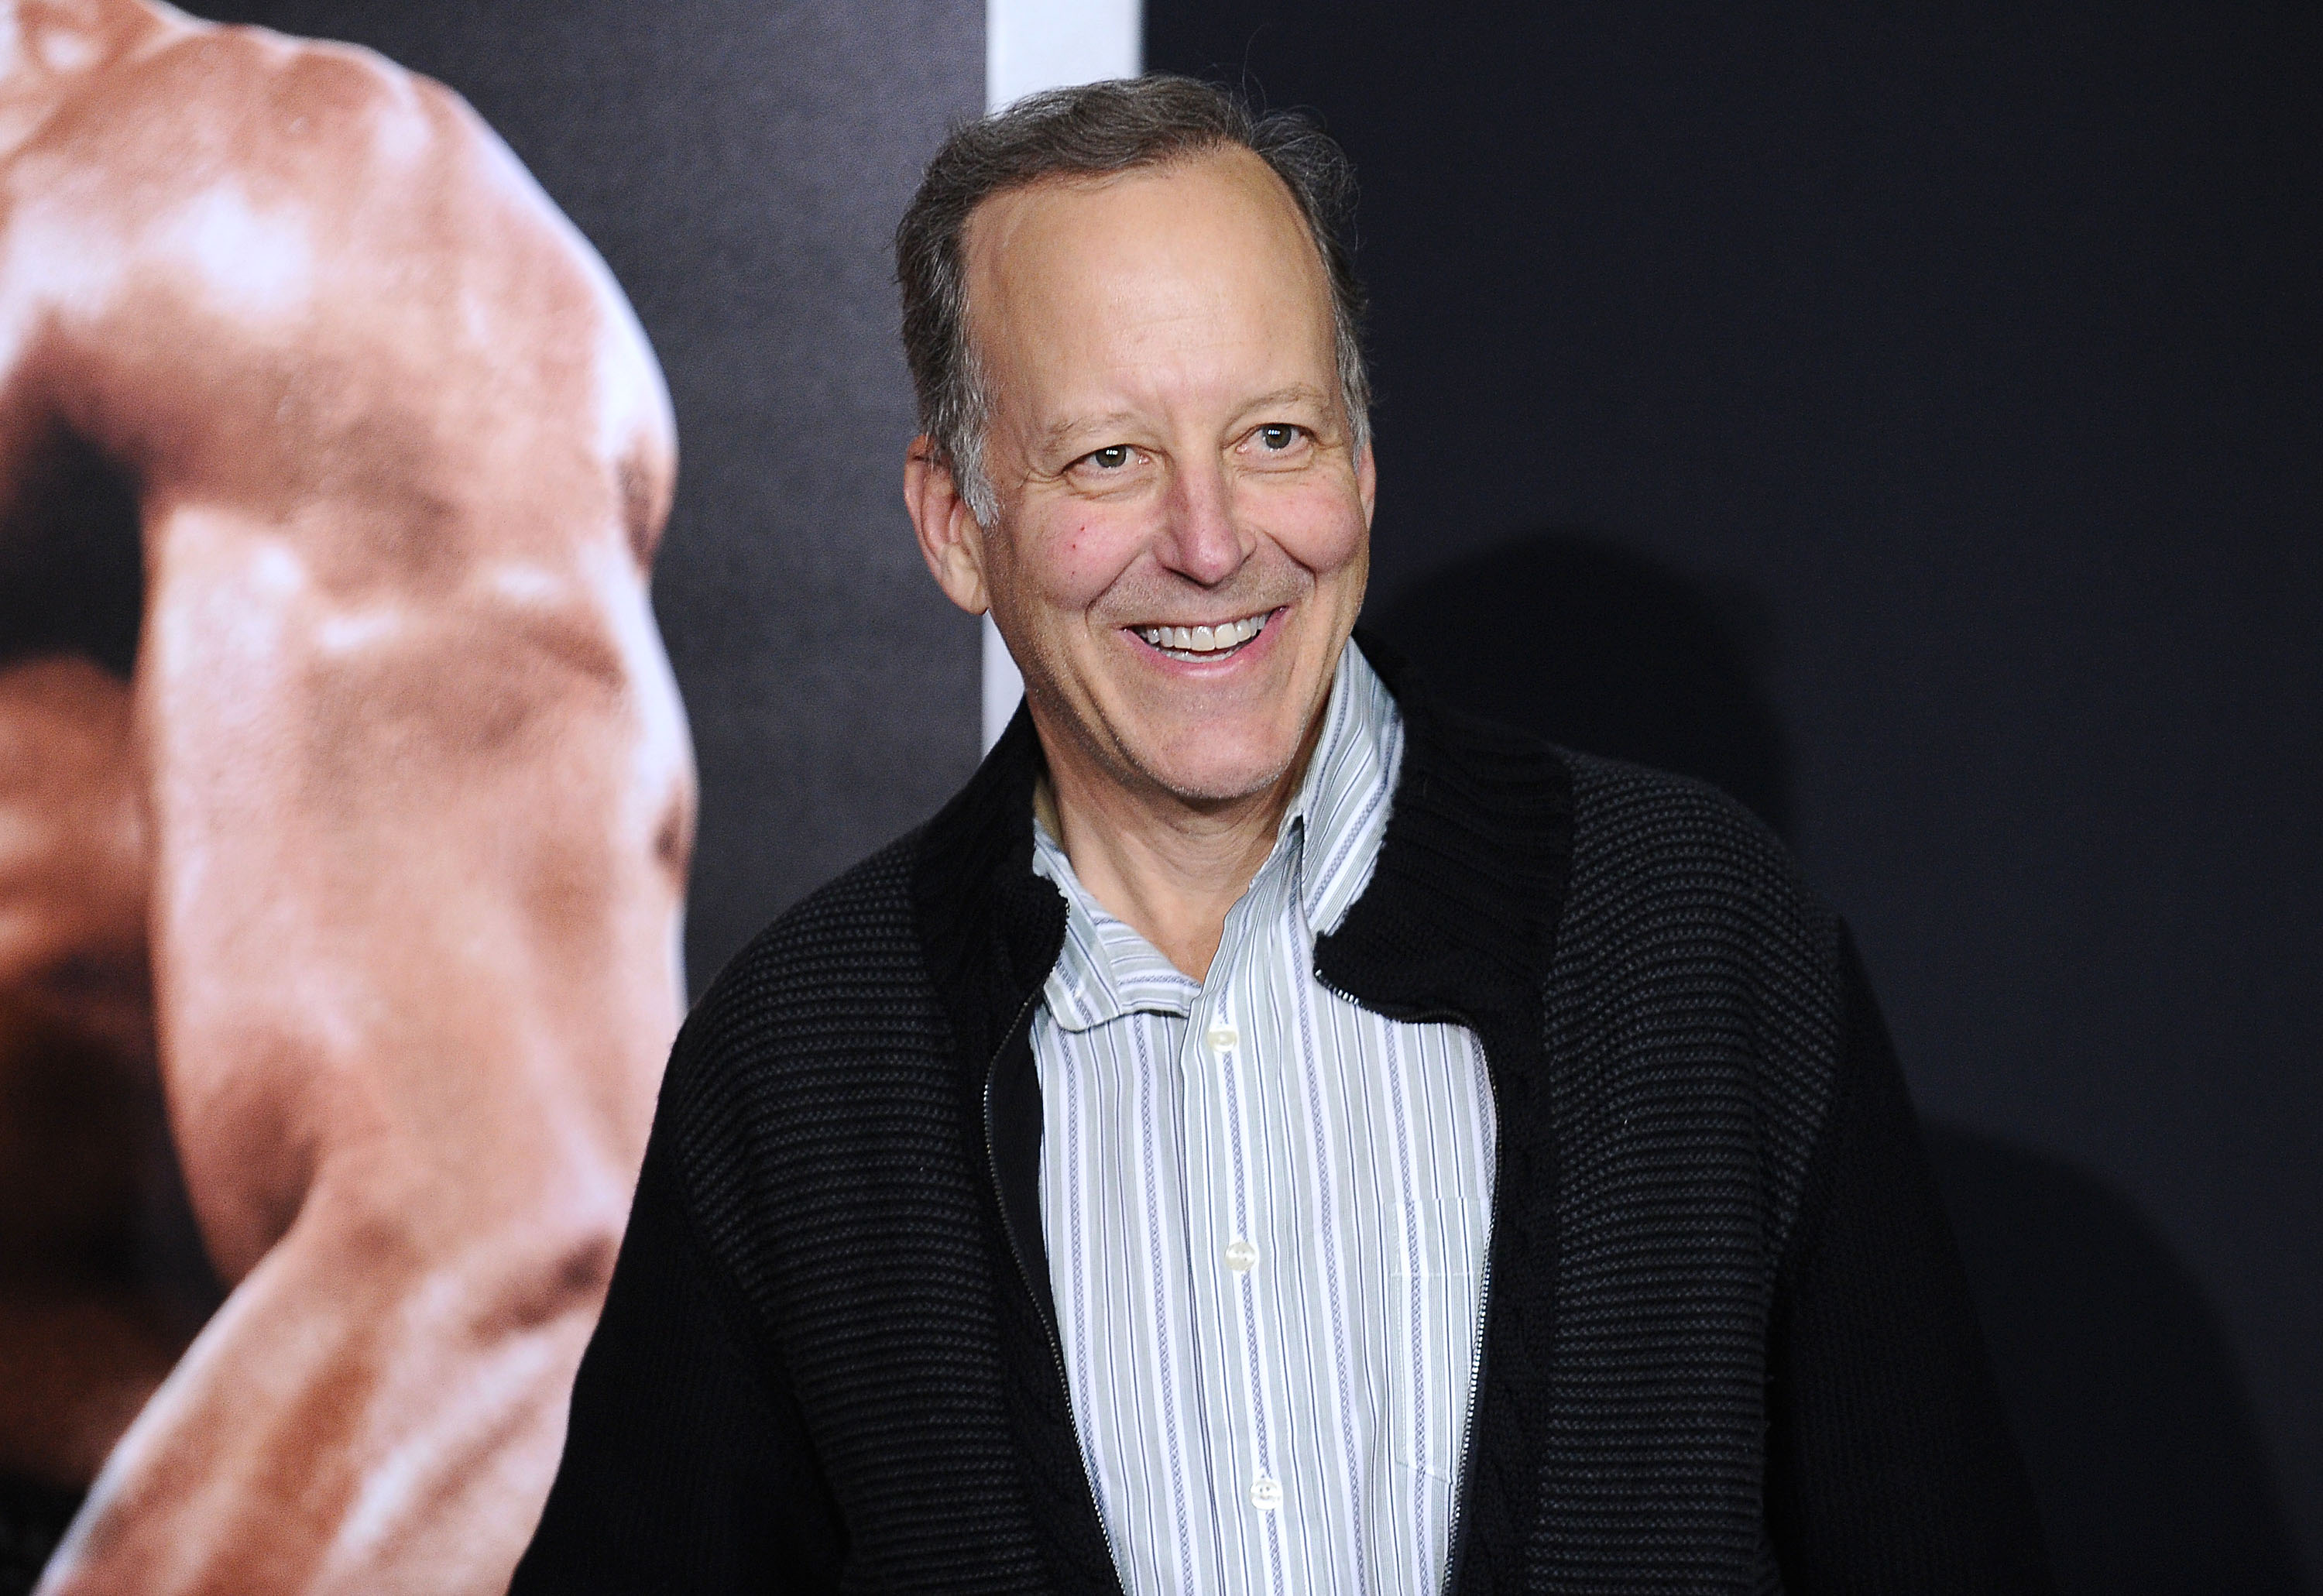 Sportscaster Jim Gray attends a movie premiere in 2015